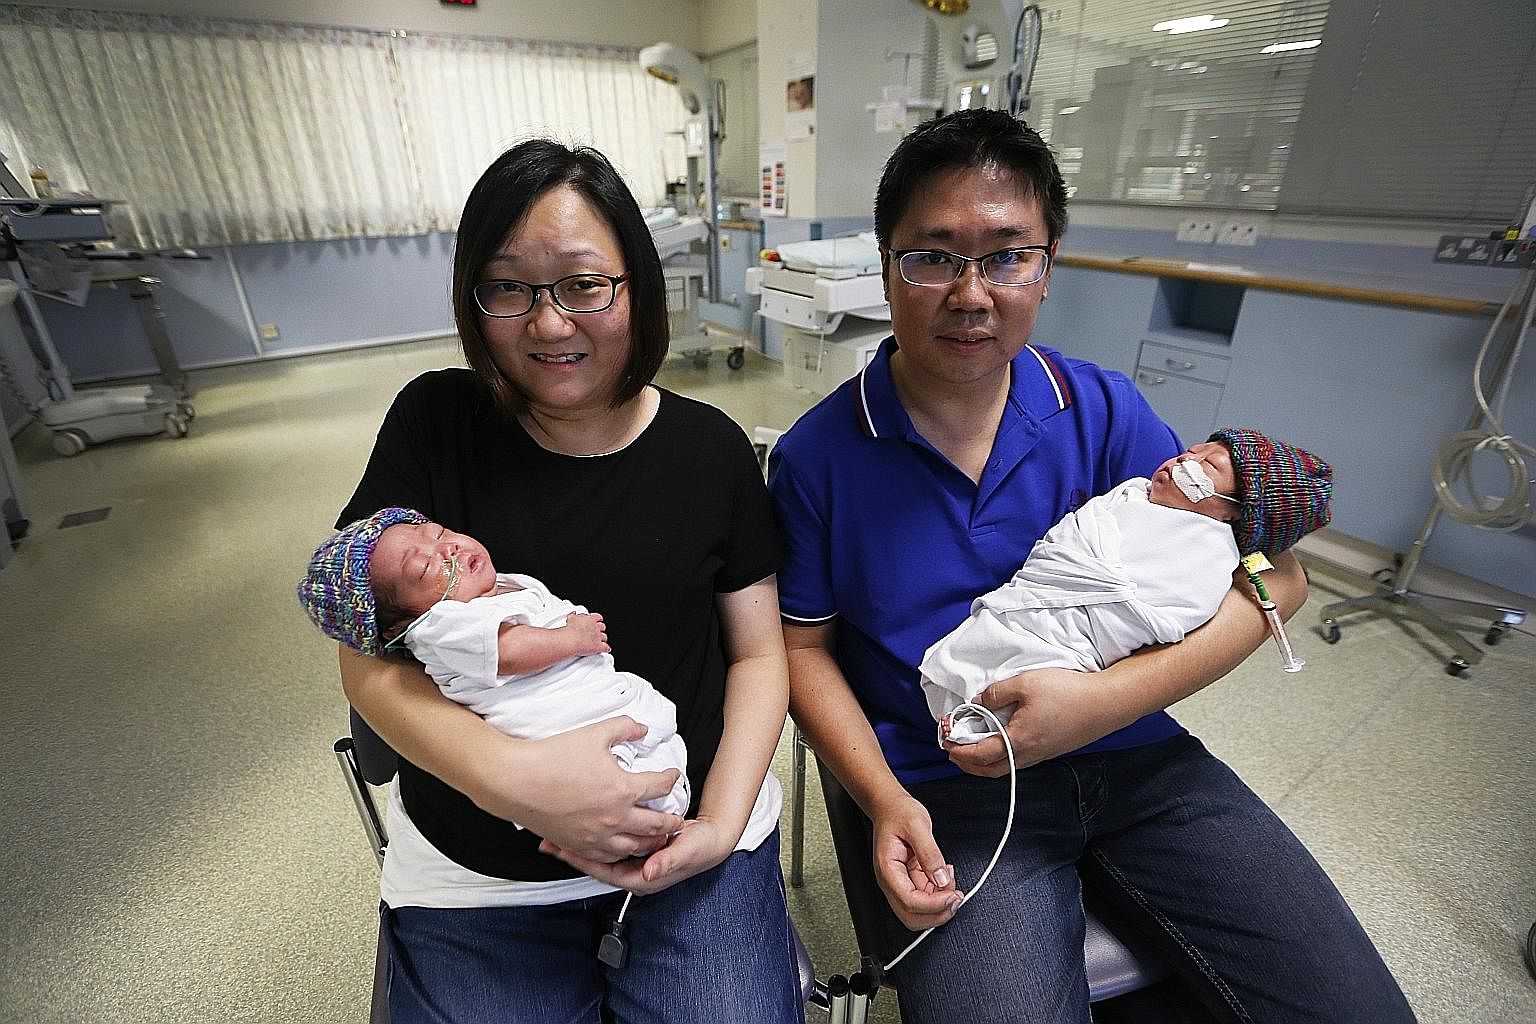 Mr Damion Lee and his wife Connie Lim with their twin boys Josias (left) and Elias, who were born in August at just 26 weeks. The babies were in the neonatal intensive care unit in KK Women's and Children's Hospital for almost two months.